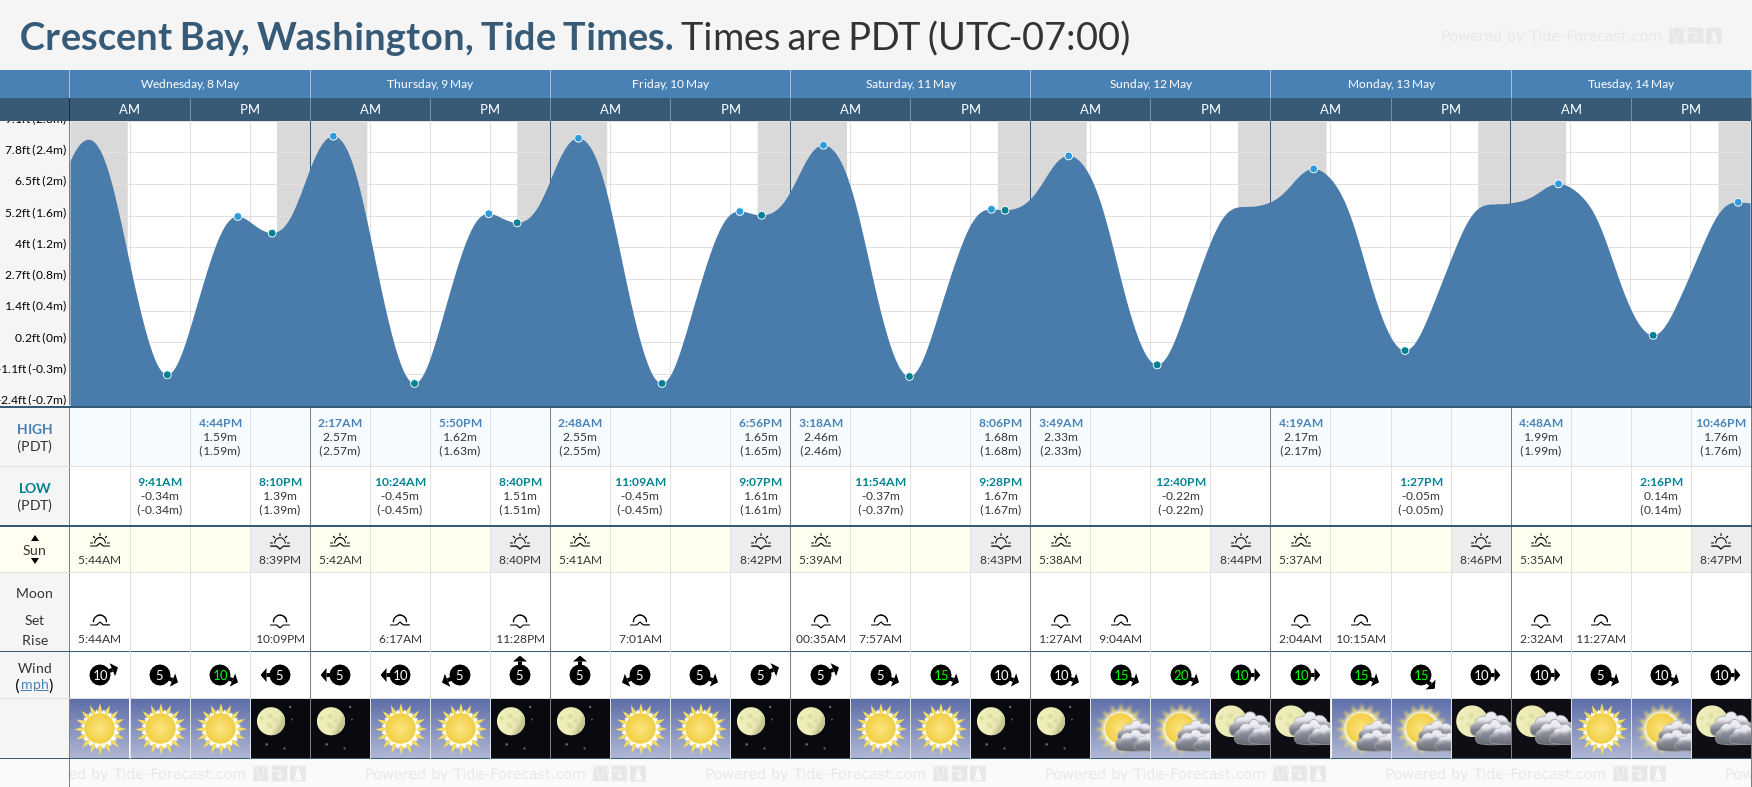 Crescent Bay, Washington Tide Chart including high and low tide tide times for the next 7 days